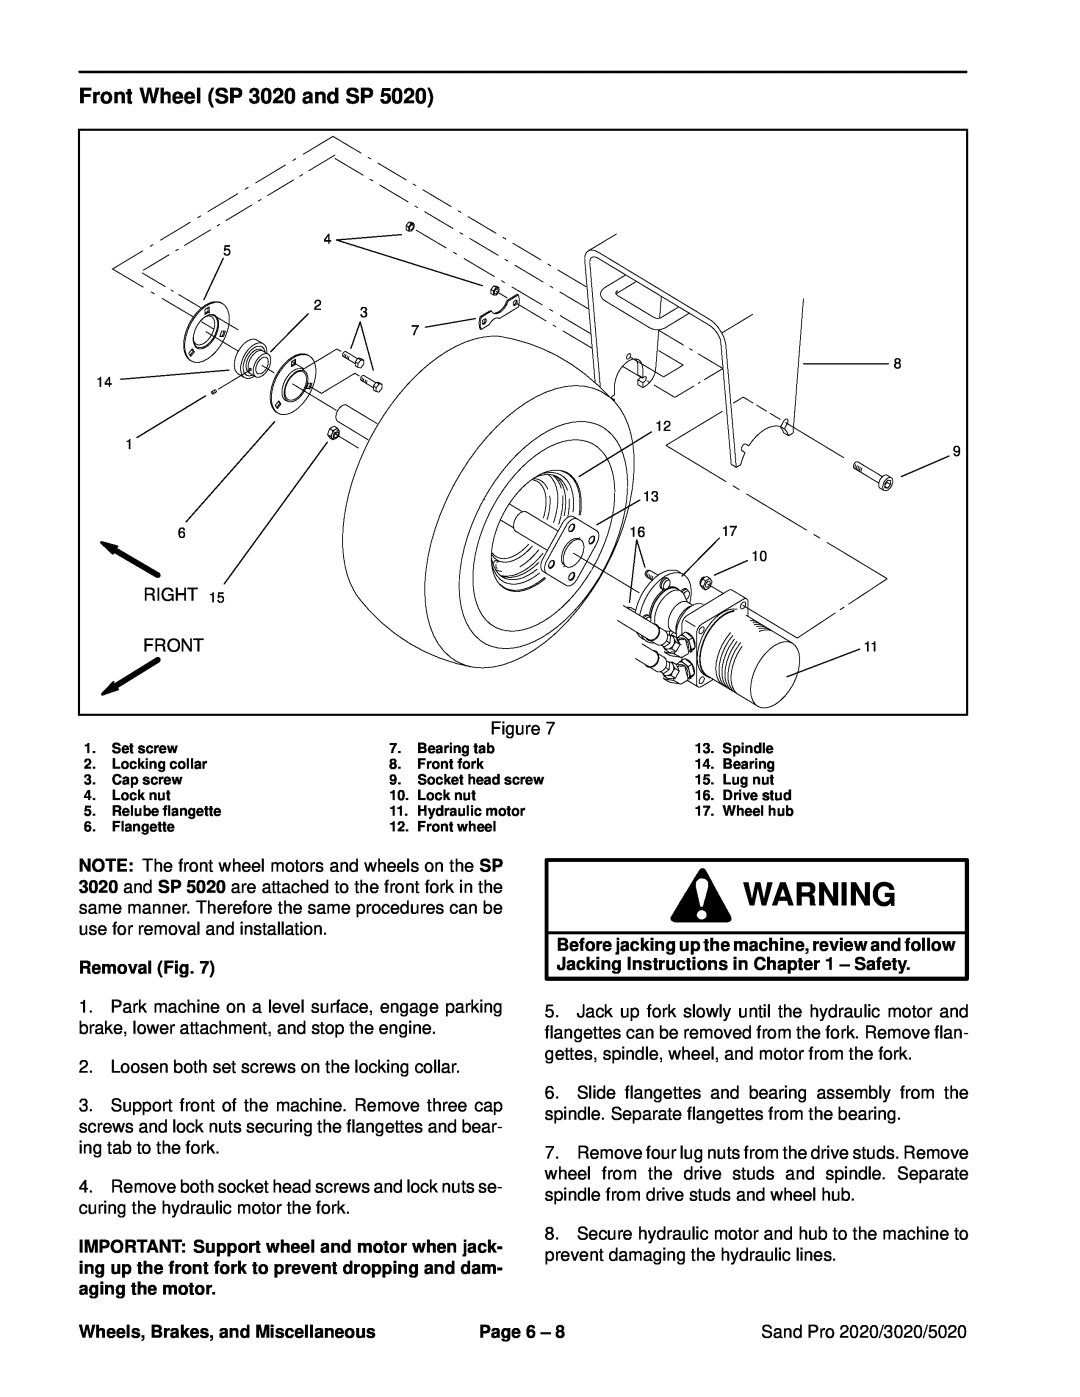 Toro Front Wheel SP 3020 and SP, Removal Fig, Wheels, Brakes, and Miscellaneous, Page 6, Sand Pro 2020/3020/5020 